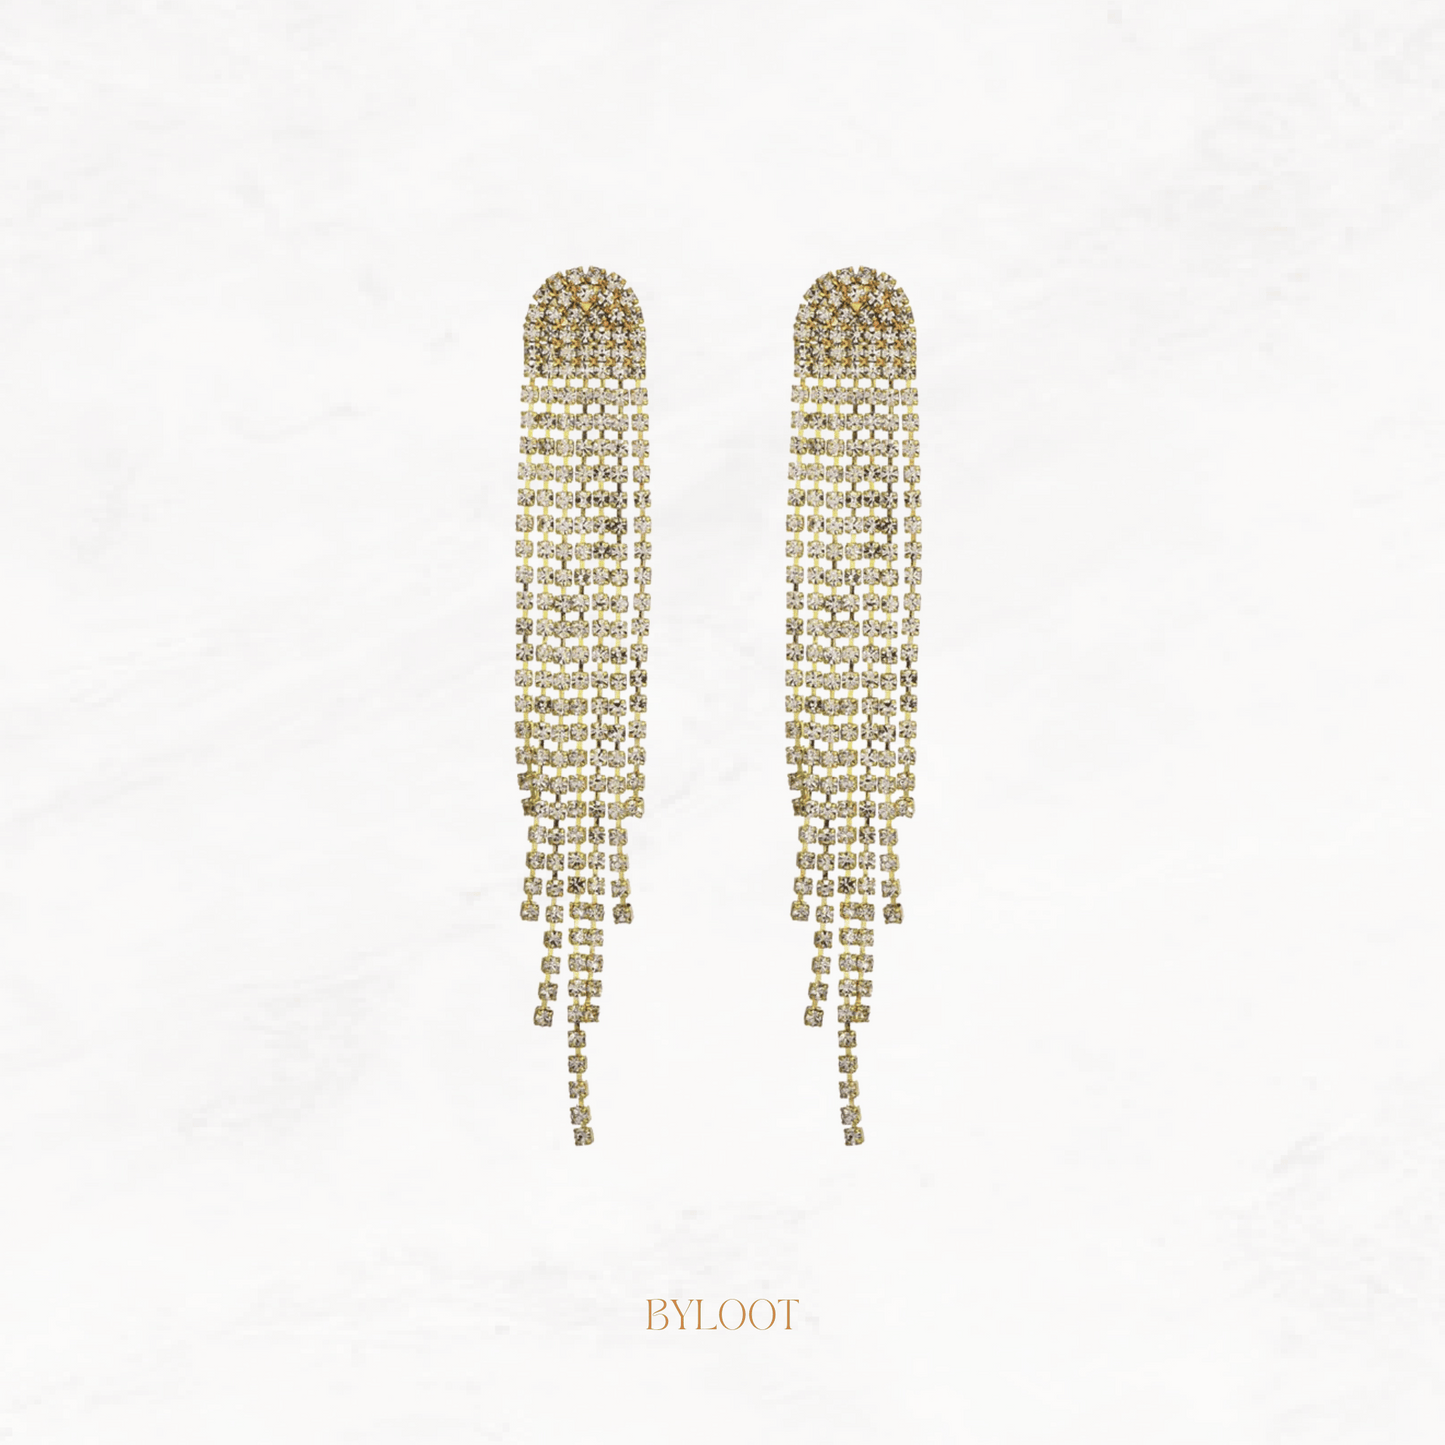 The perfect statement earring